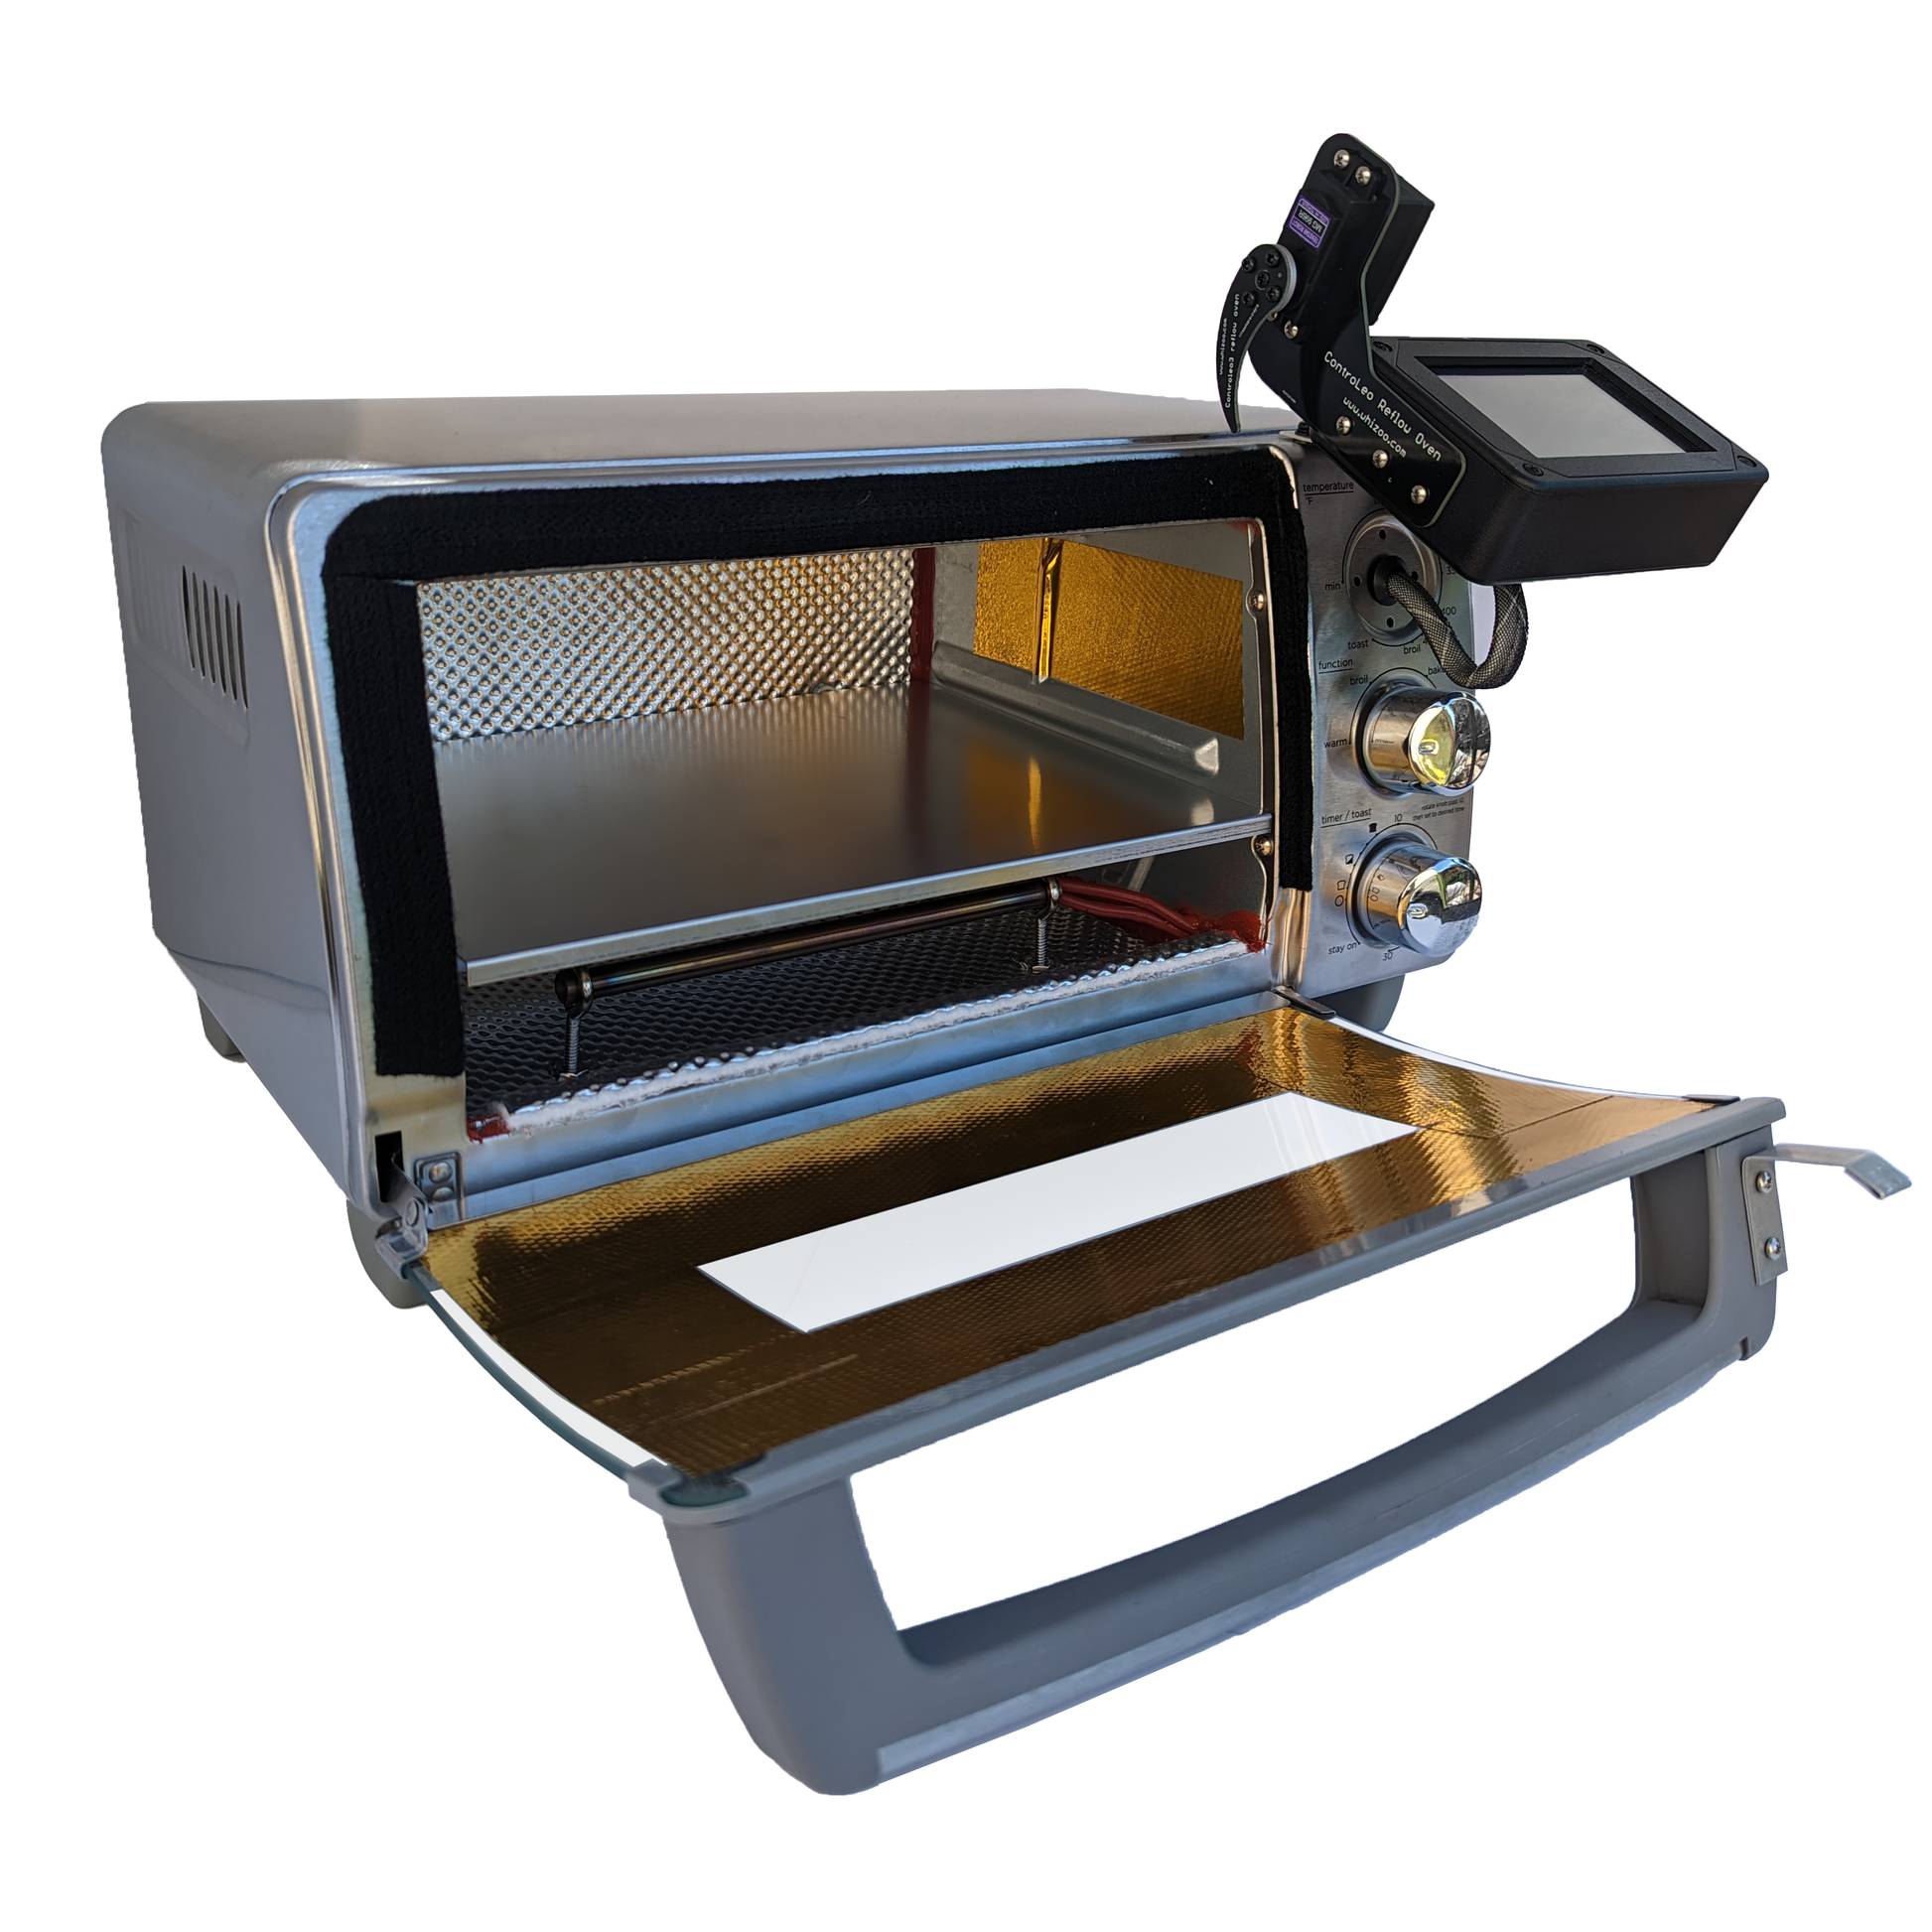 What is a Reflow Oven?